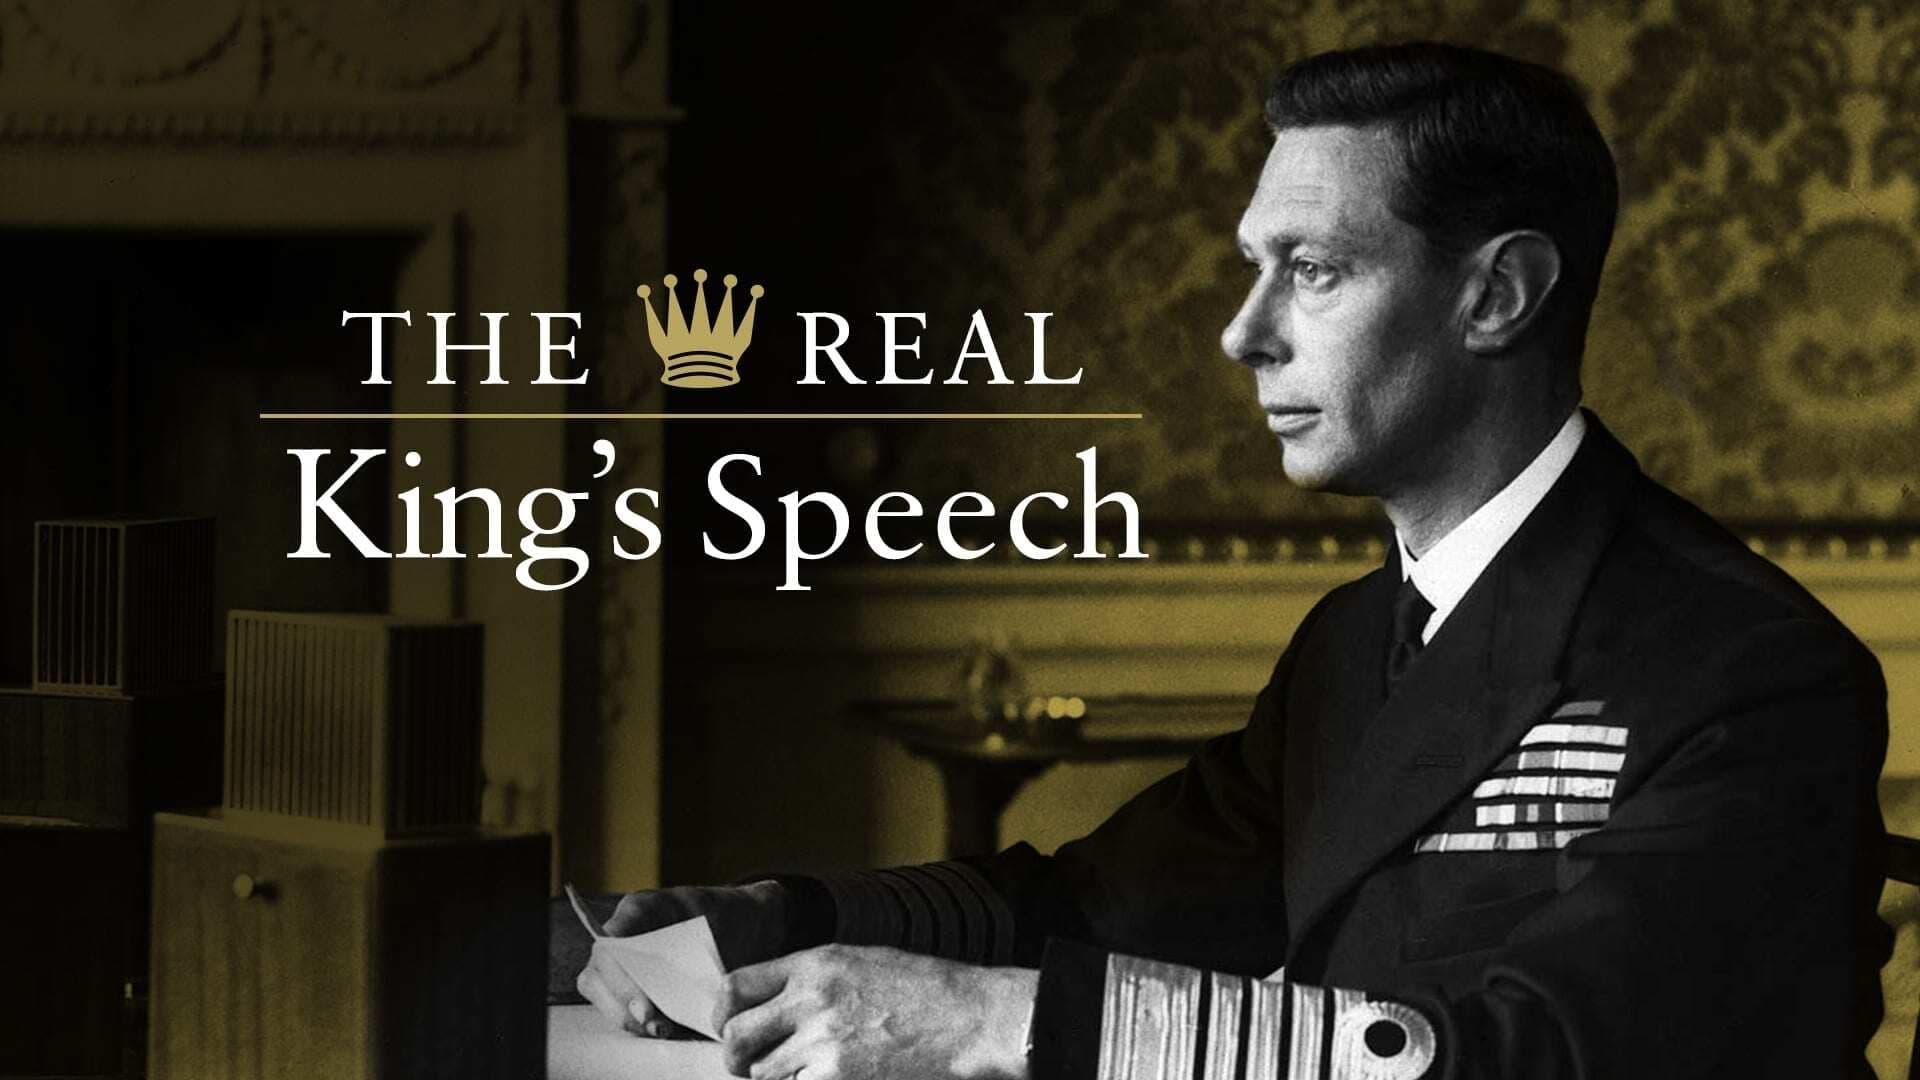 The Real King's Speech backdrop